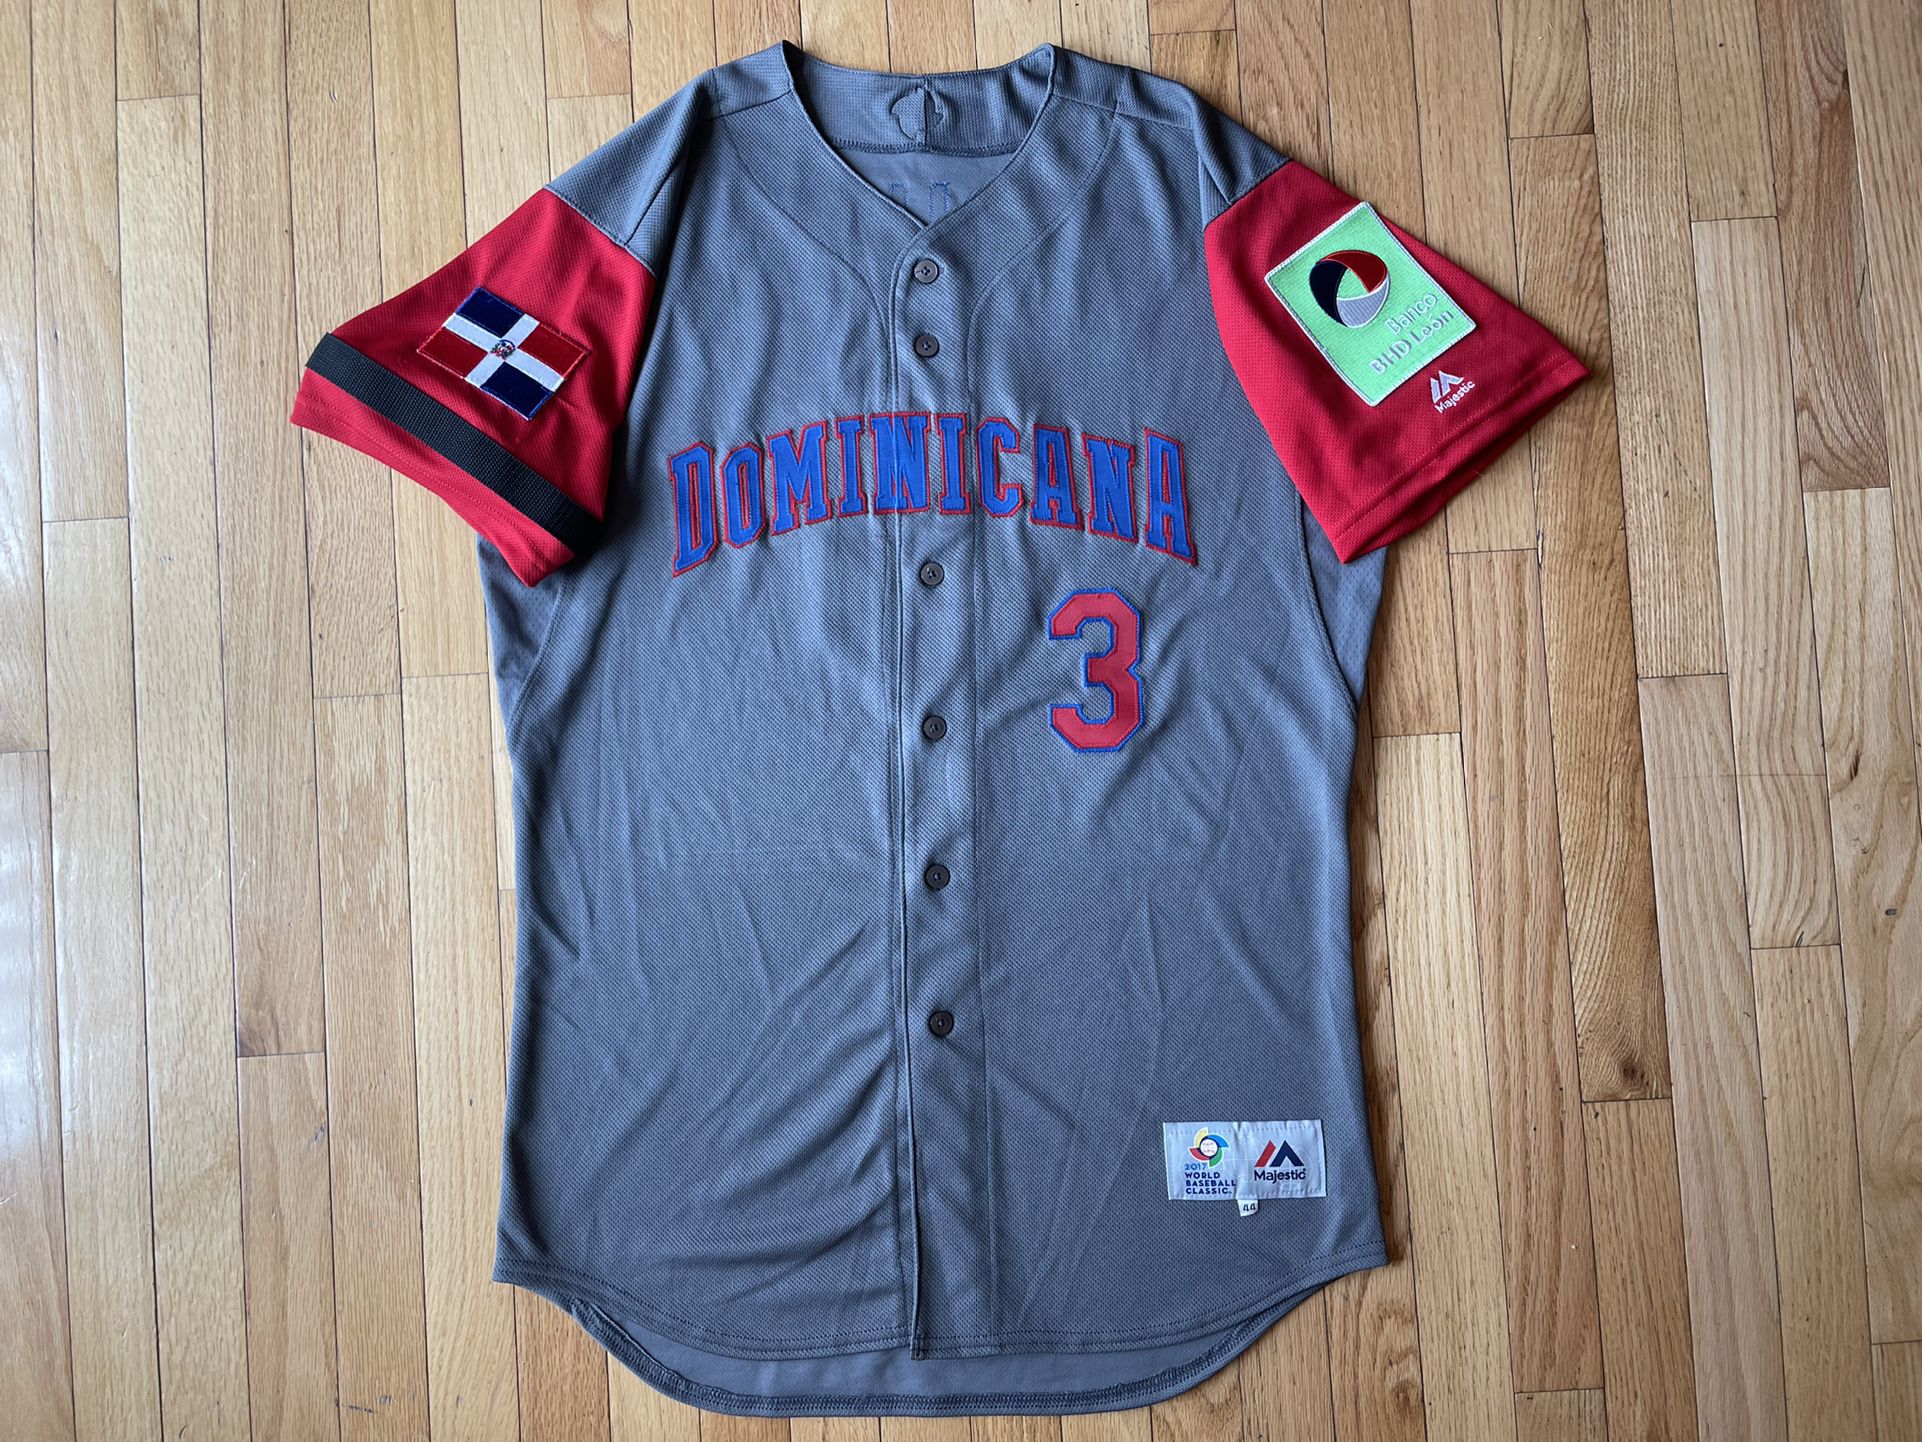 2017 WBC Team Dominicana Manny Machado Majestic Jersey Dominican Size 44  for Sale in New Carrolltn, MD - OfferUp